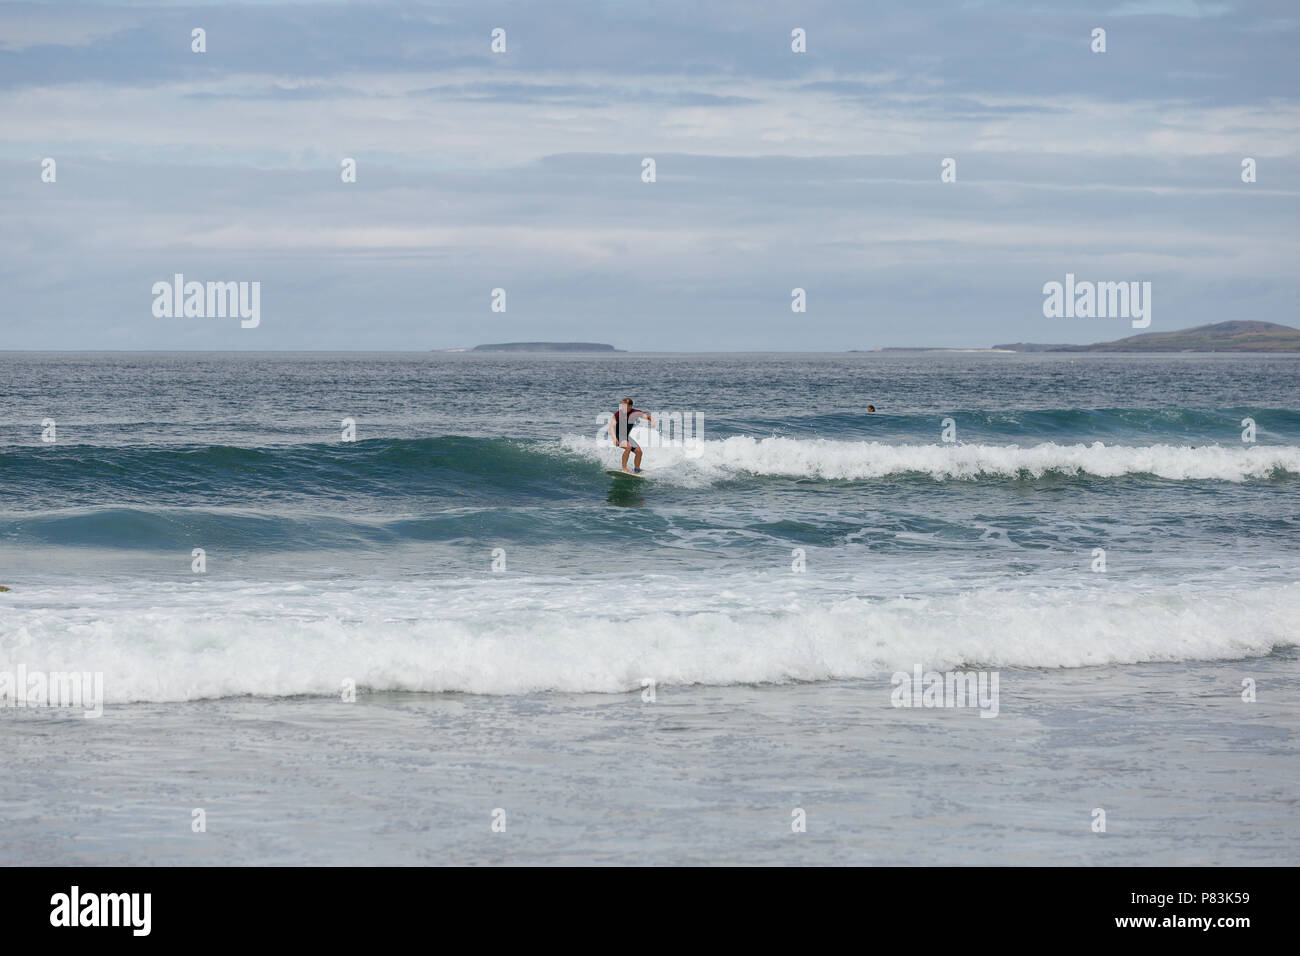 Strandhill, Sligo, Ireland. 8th July, 2018. Surfers enjoying the great weather and Atlantic waves surfing in Strandhill in county Sligo - one of the best places in Europe to surf. Credit: Michael Grubka/Alamy Live News Stock Photo